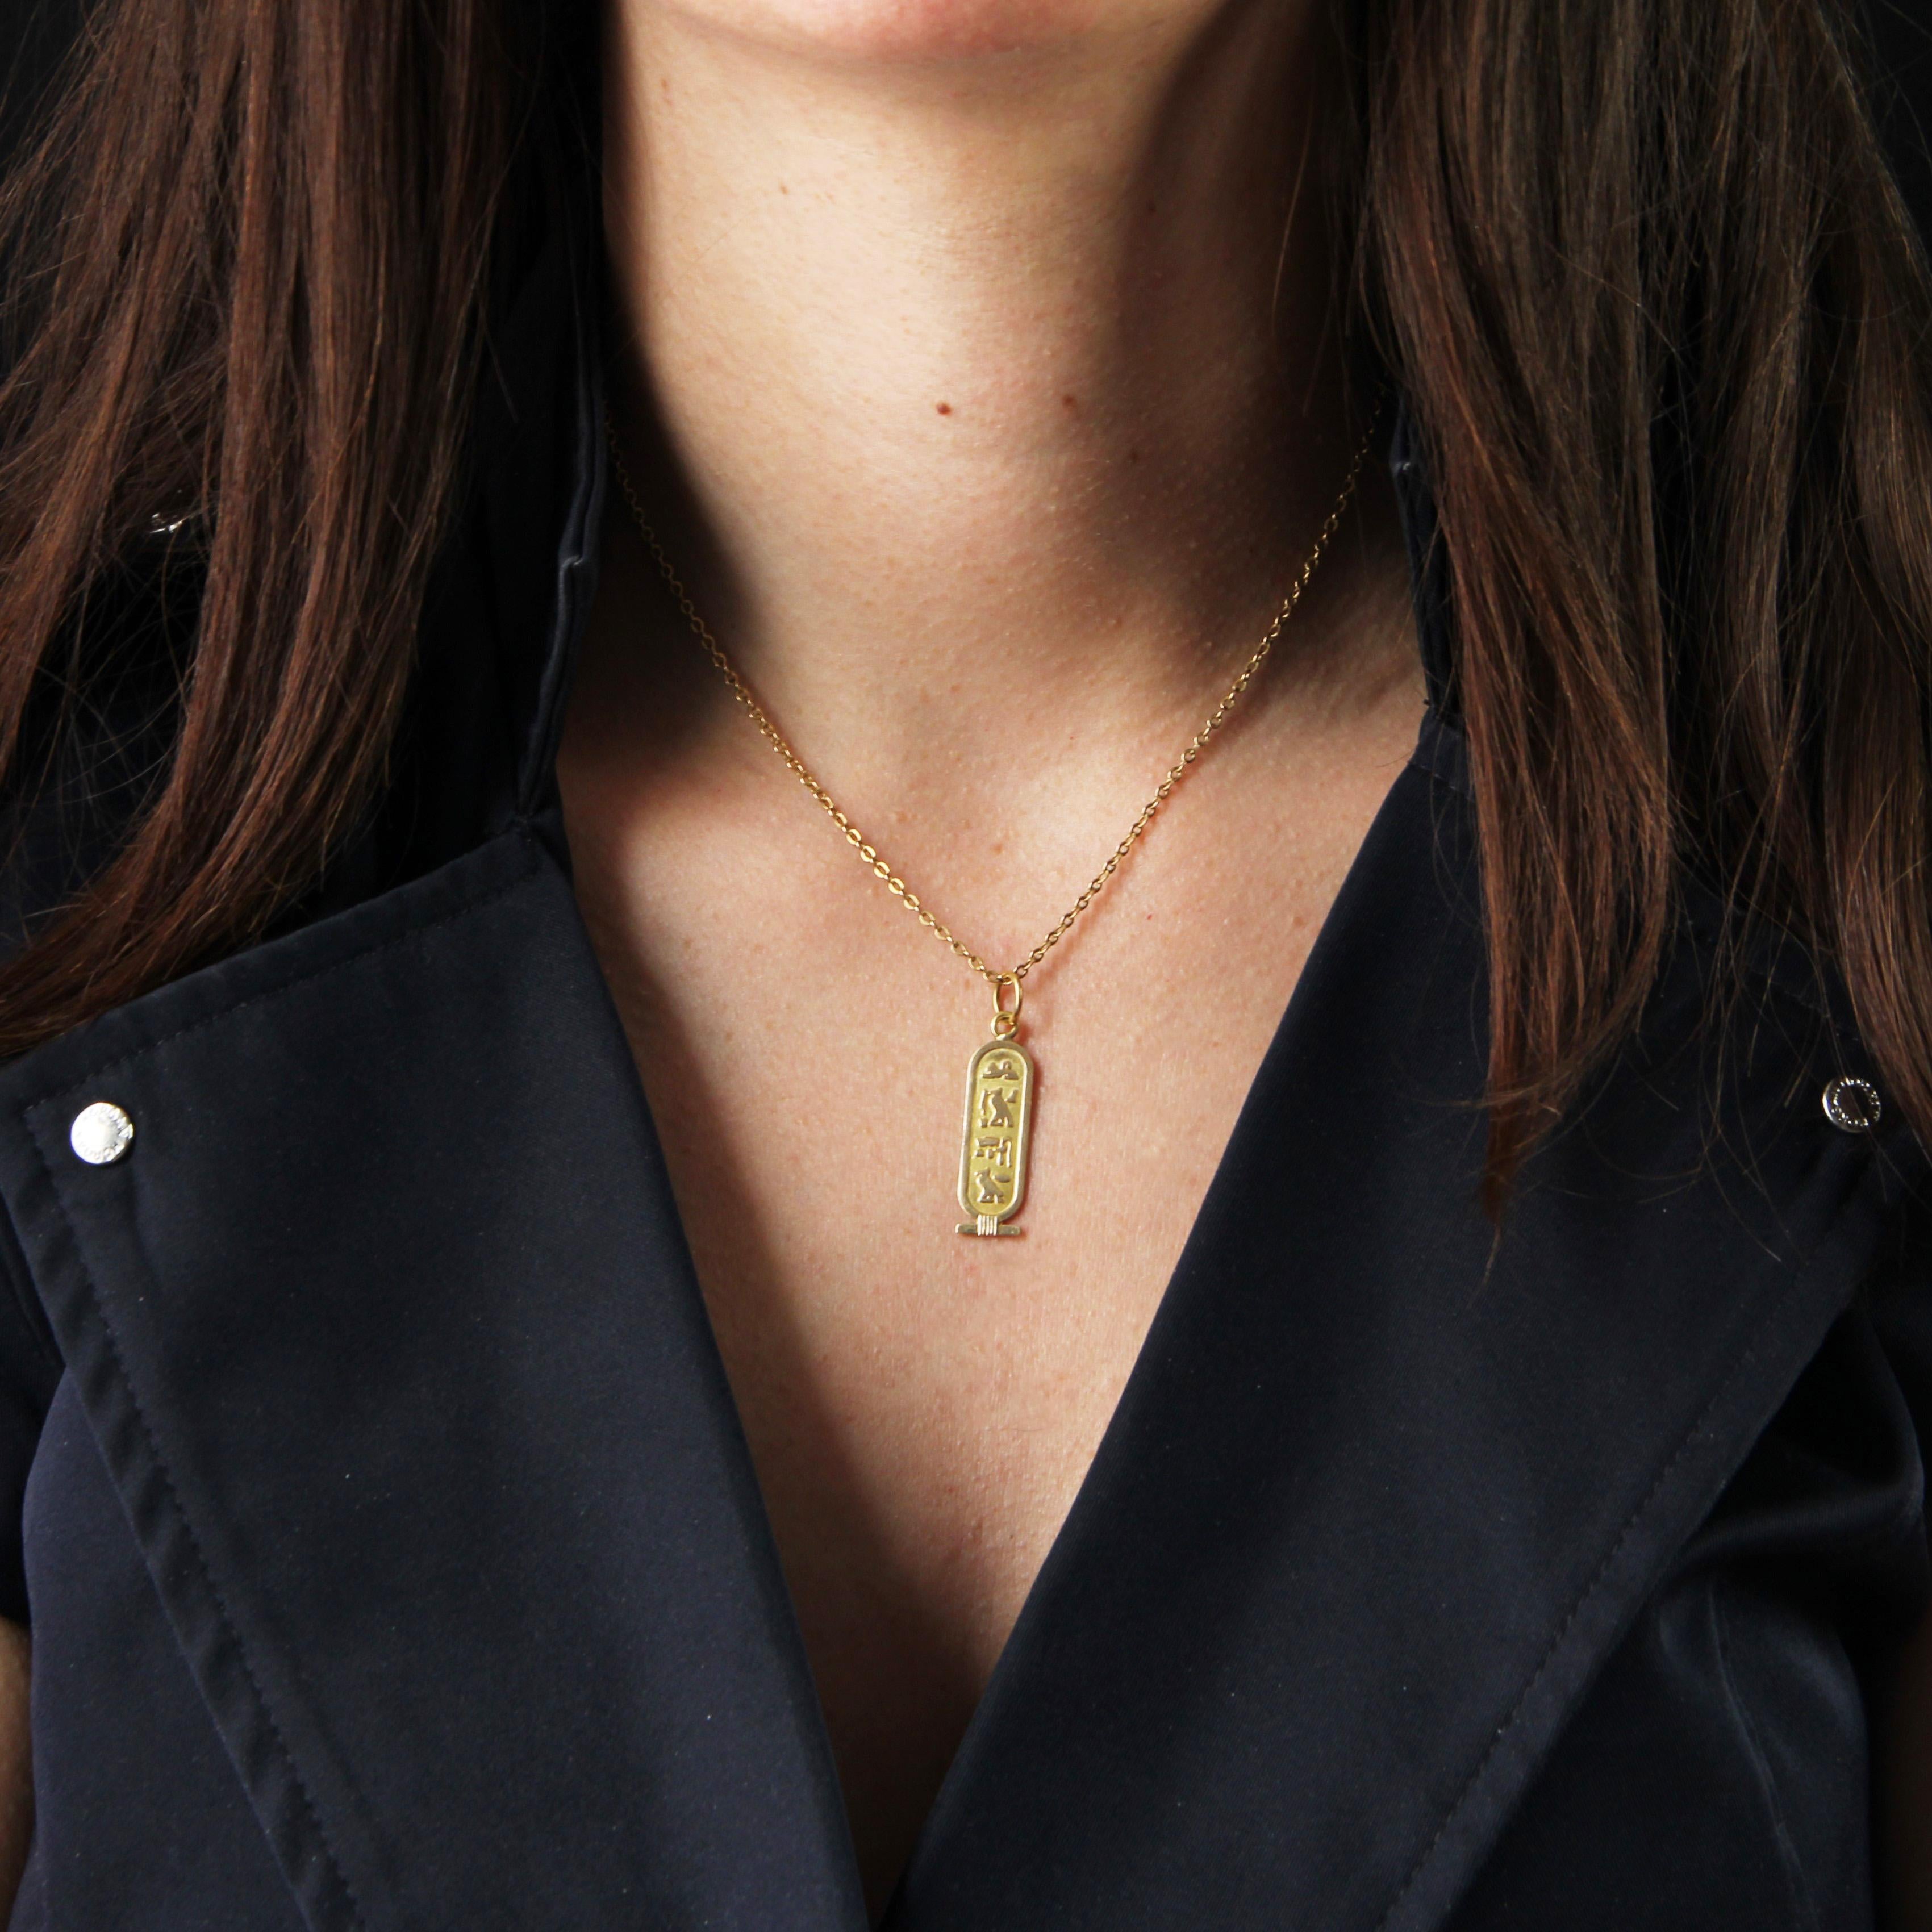 Pendant in 18 karat yellow gold.
This gold pendant features an Egyptian cartouche decorated with hieroglyphs in relief on matte yellow gold. The back is smooth.
Pendant sold alone without the chain of presentation.
Height : 3,5 cm approximately,